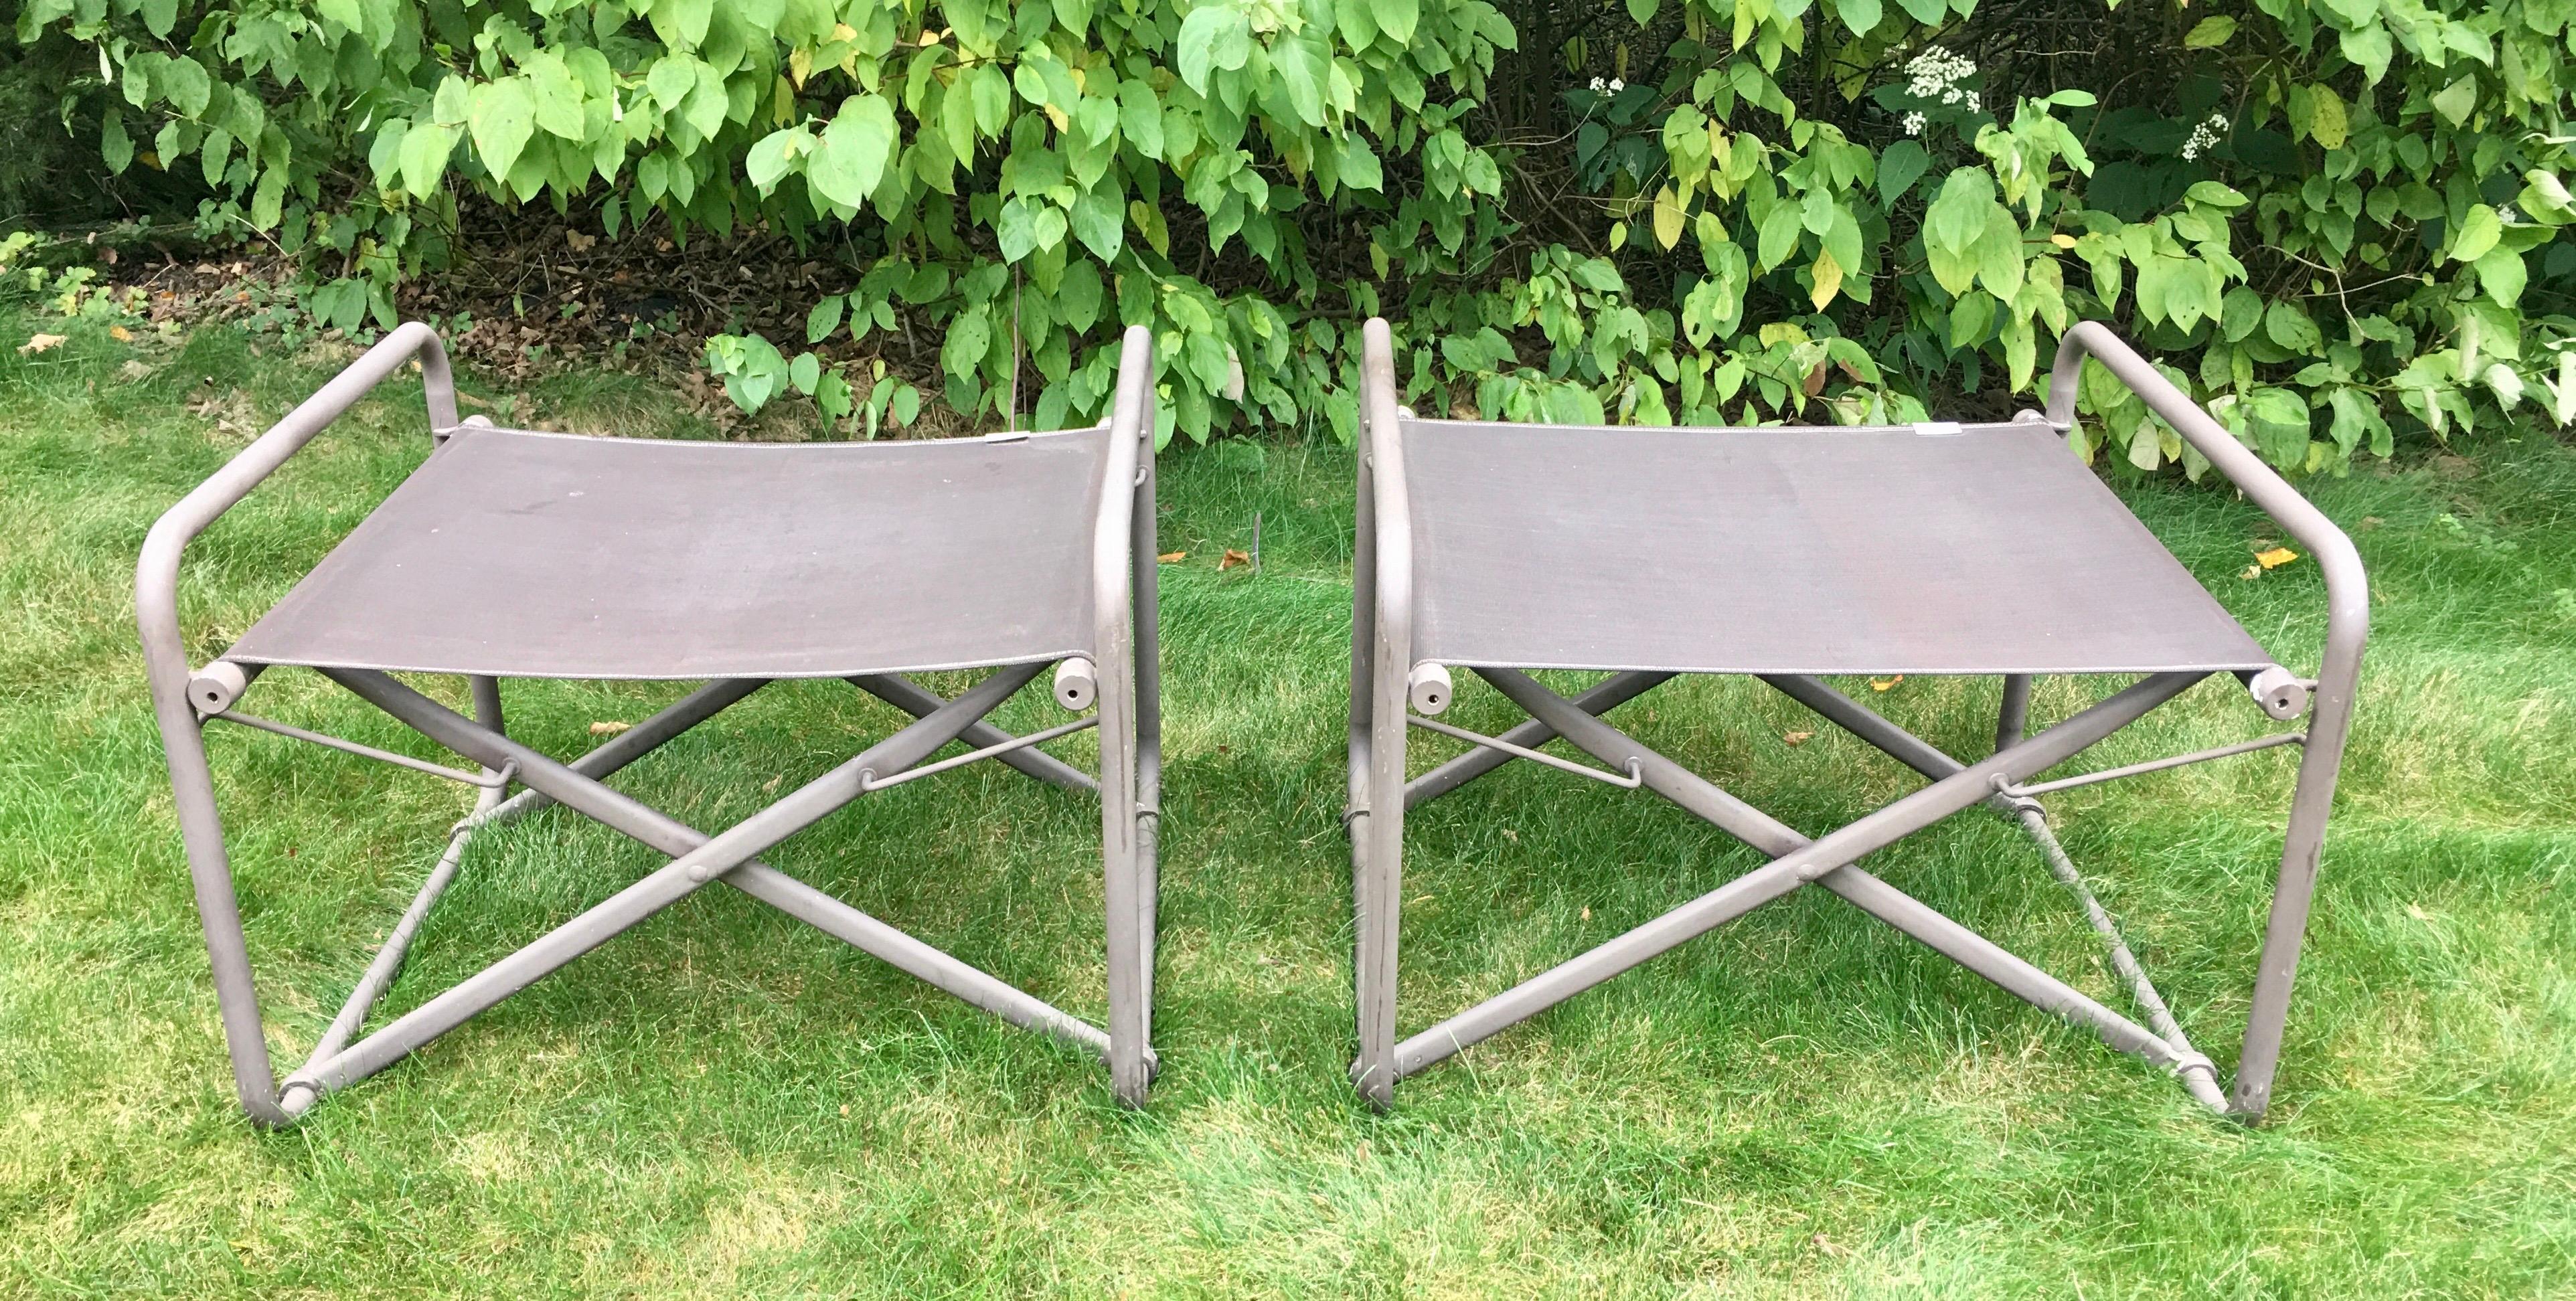 Pair of sculptural Mid-Century Modern Brown Jordan Original Nomad collection ottomans, circa 1970s. Features original brown colored powder-coated aluminum/metal frames with brown mesh fabric. These folding Campaign style benches can be used as